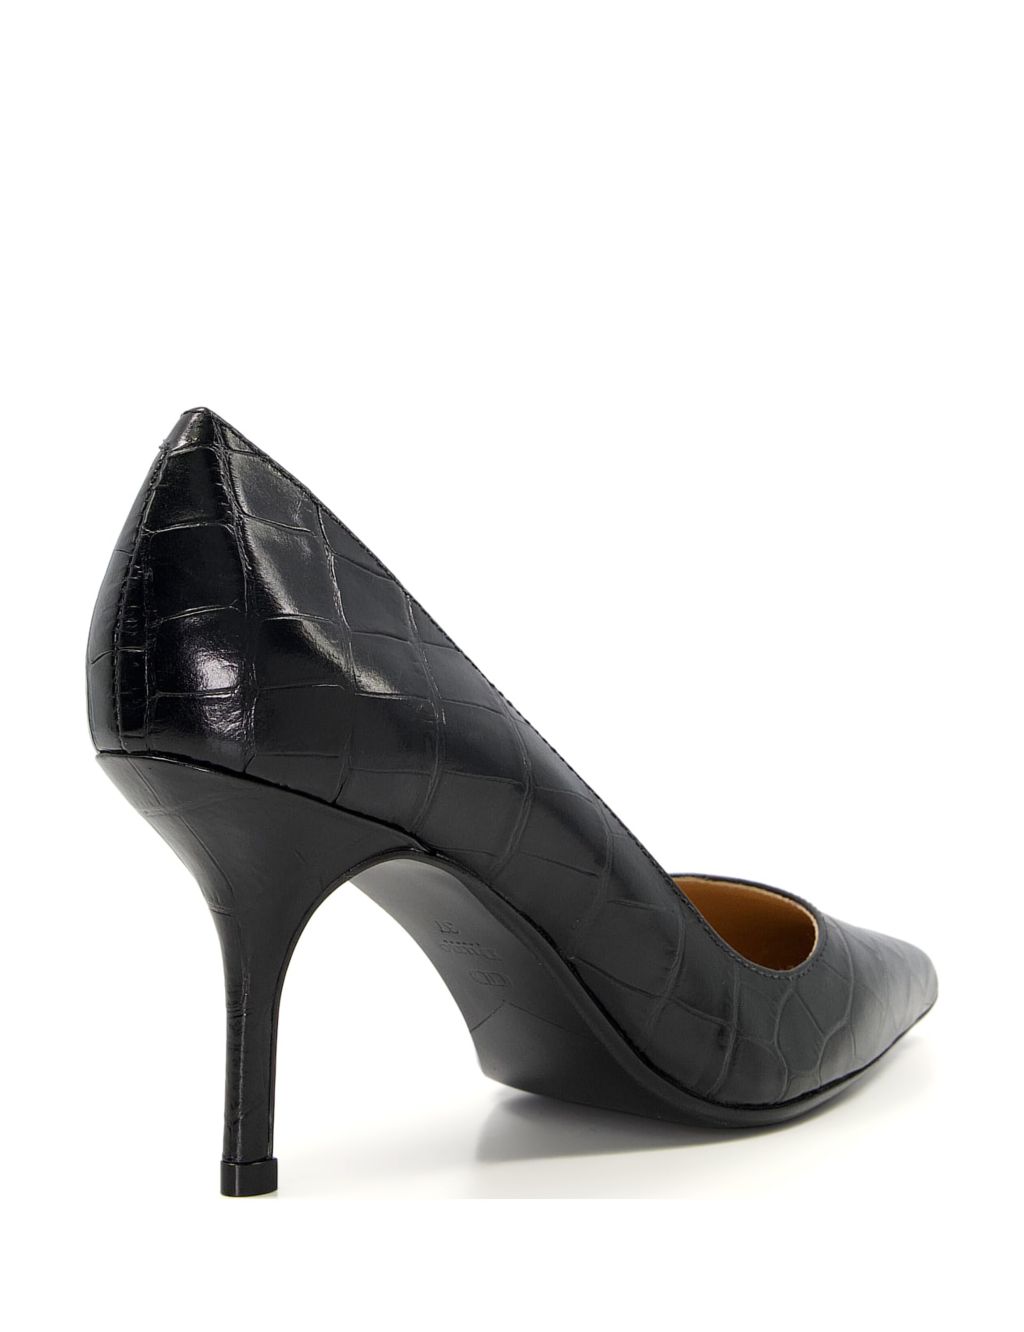 Leather Croc Stiletto Pointed Court Shoes image 4